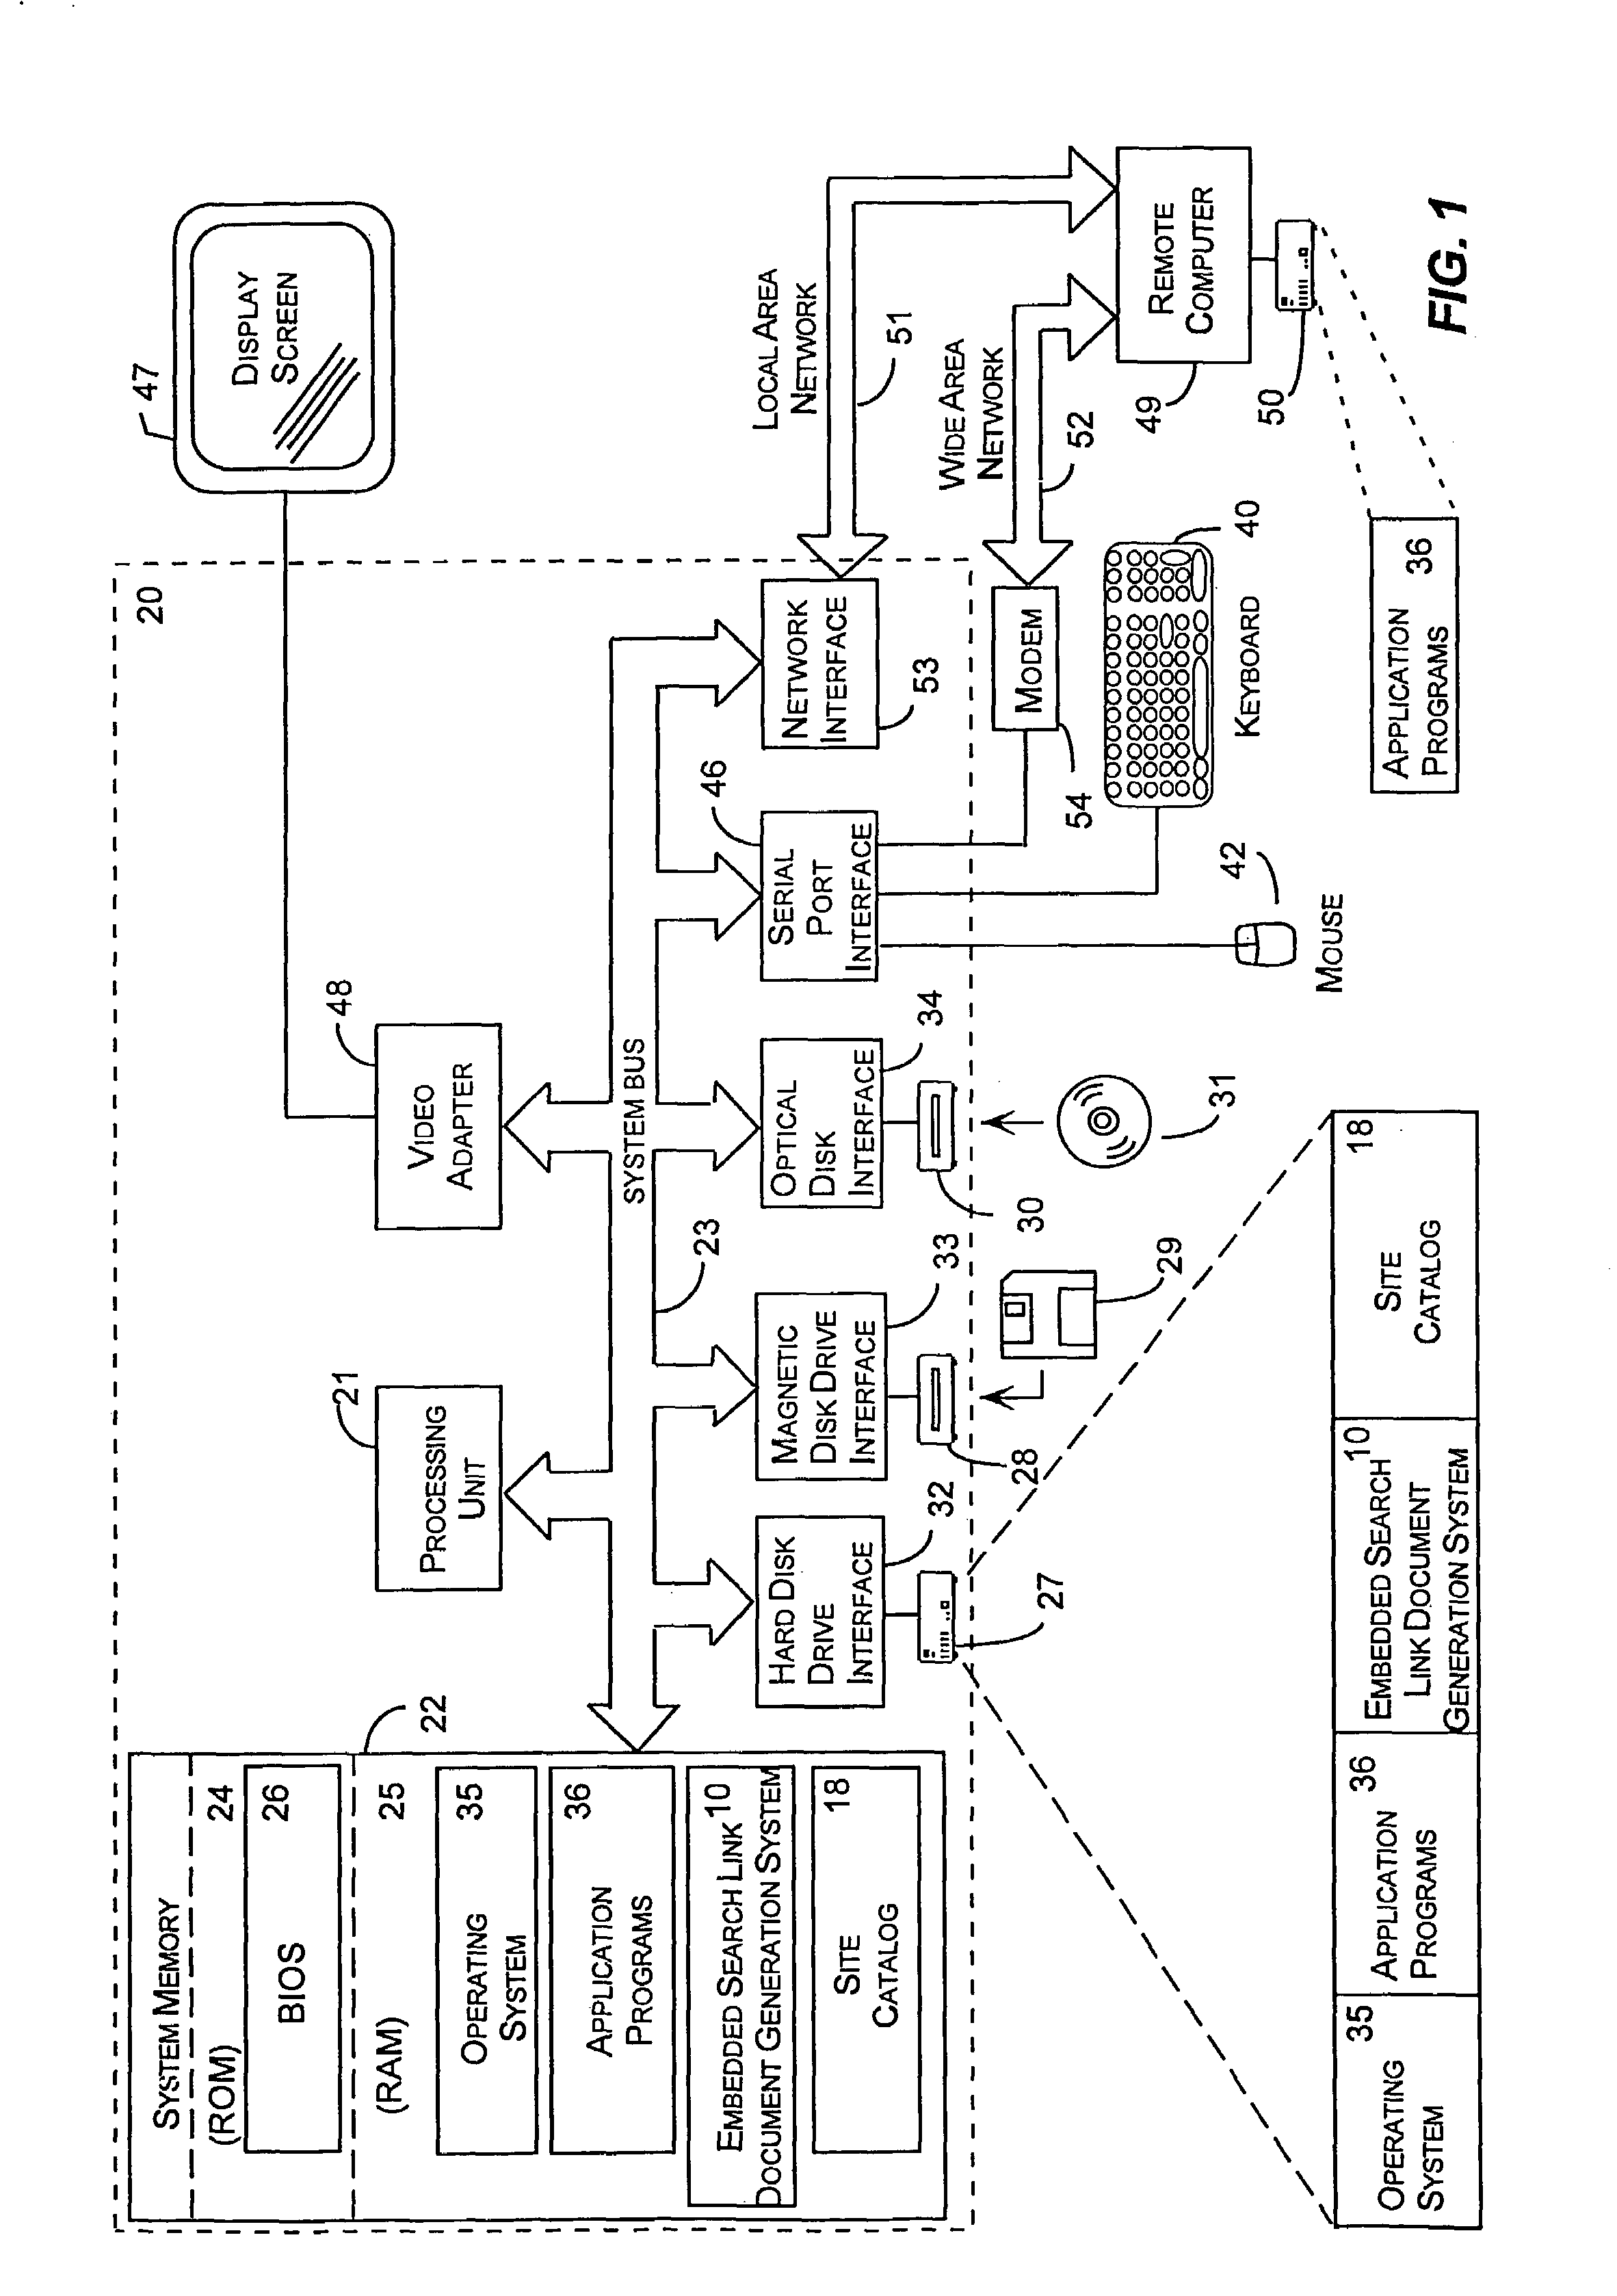 Method and system for creating an embedded search link document